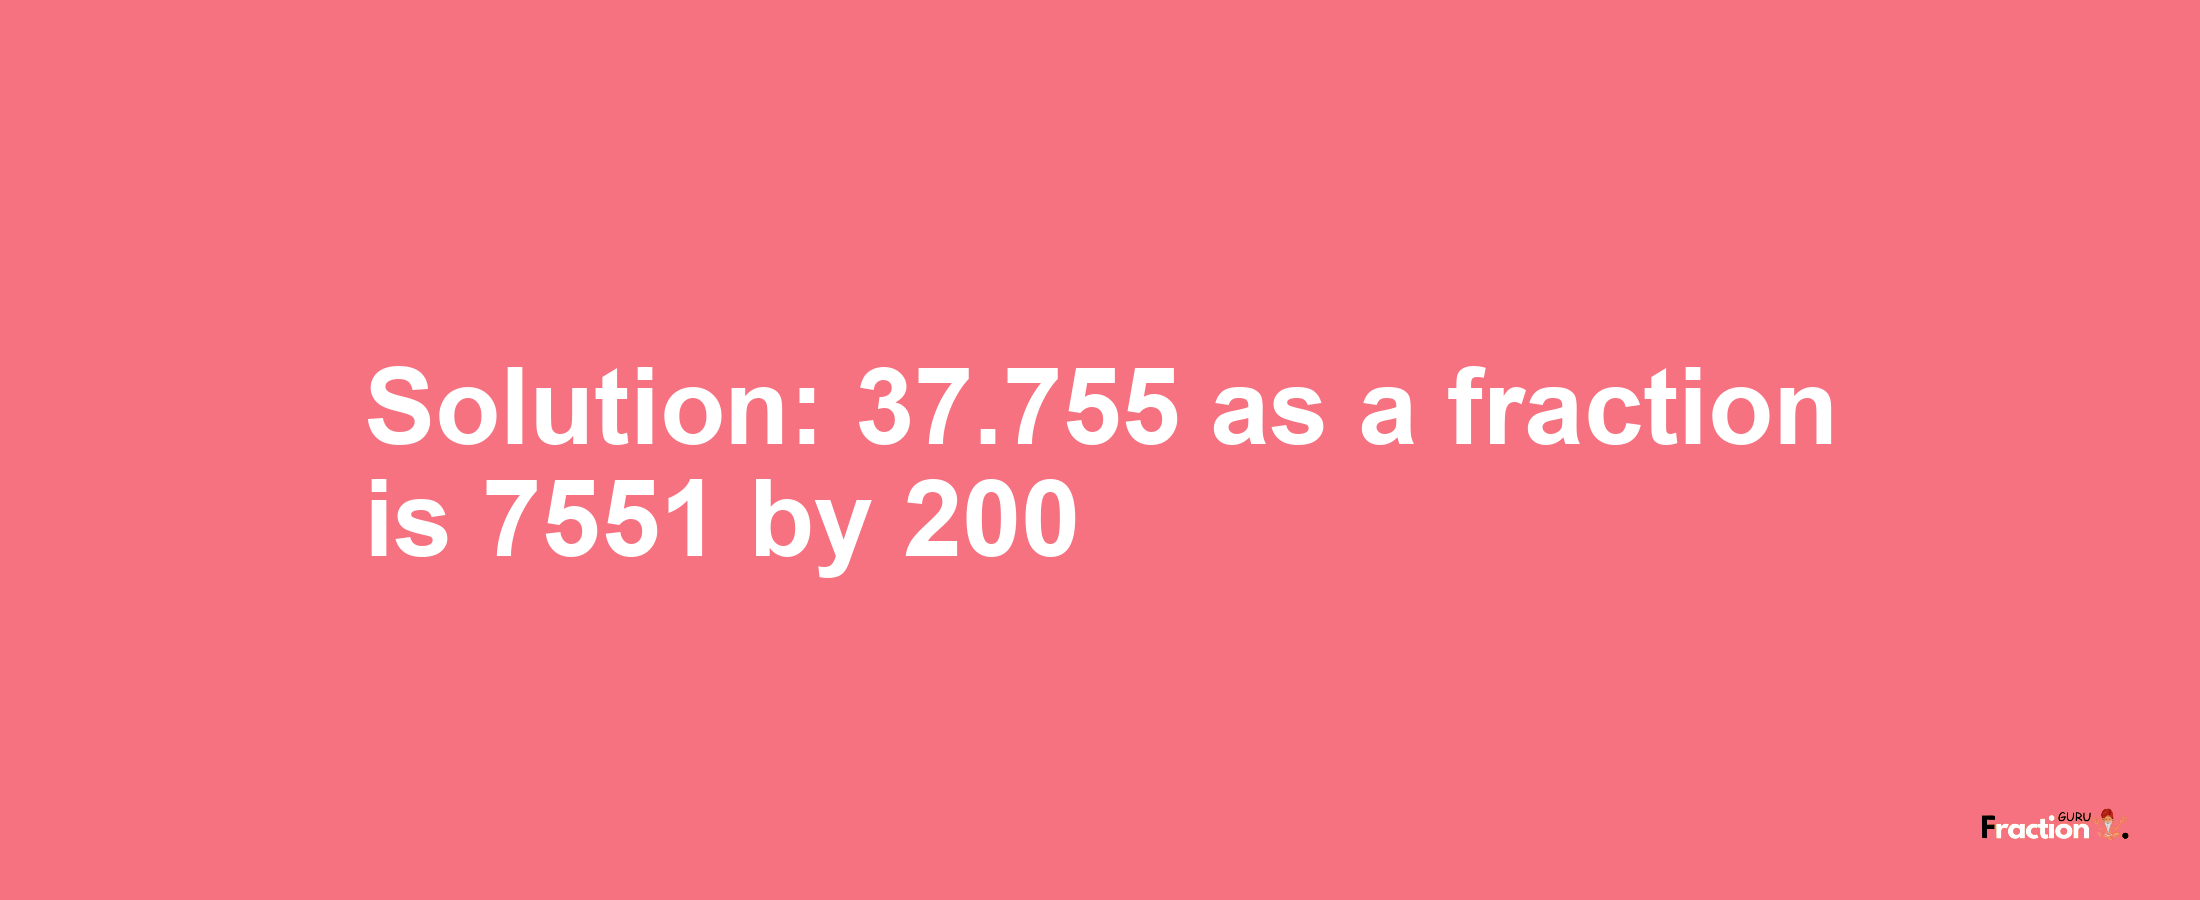 Solution:37.755 as a fraction is 7551/200